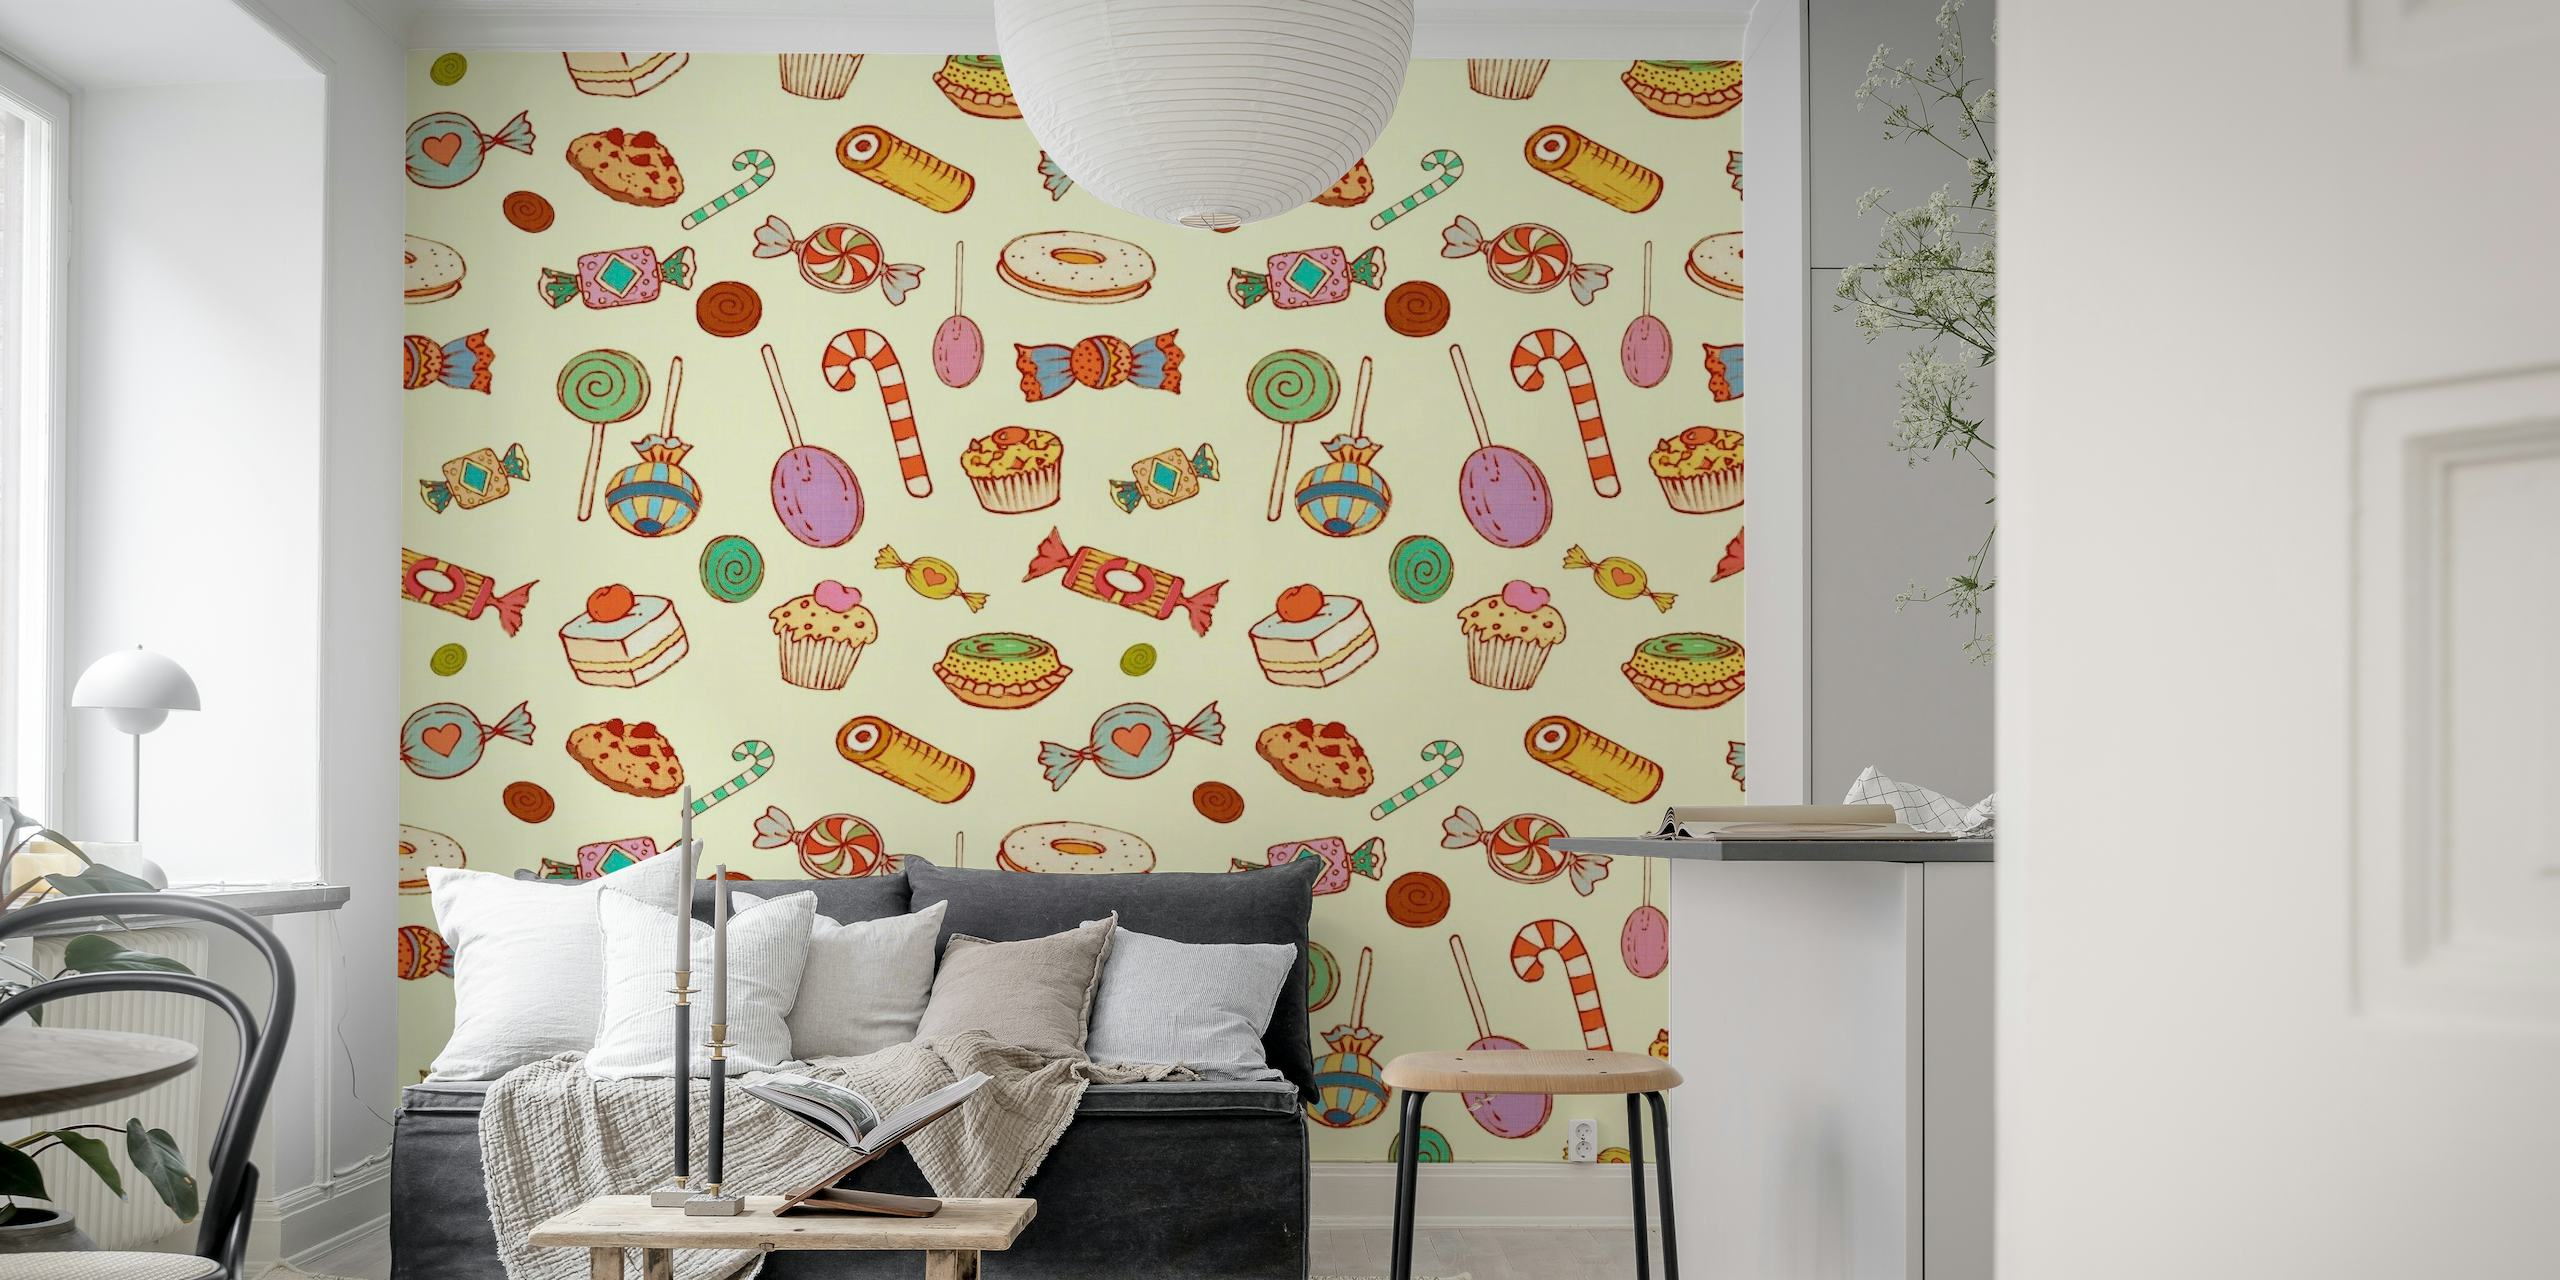 Candies and Pastries (cream) behang